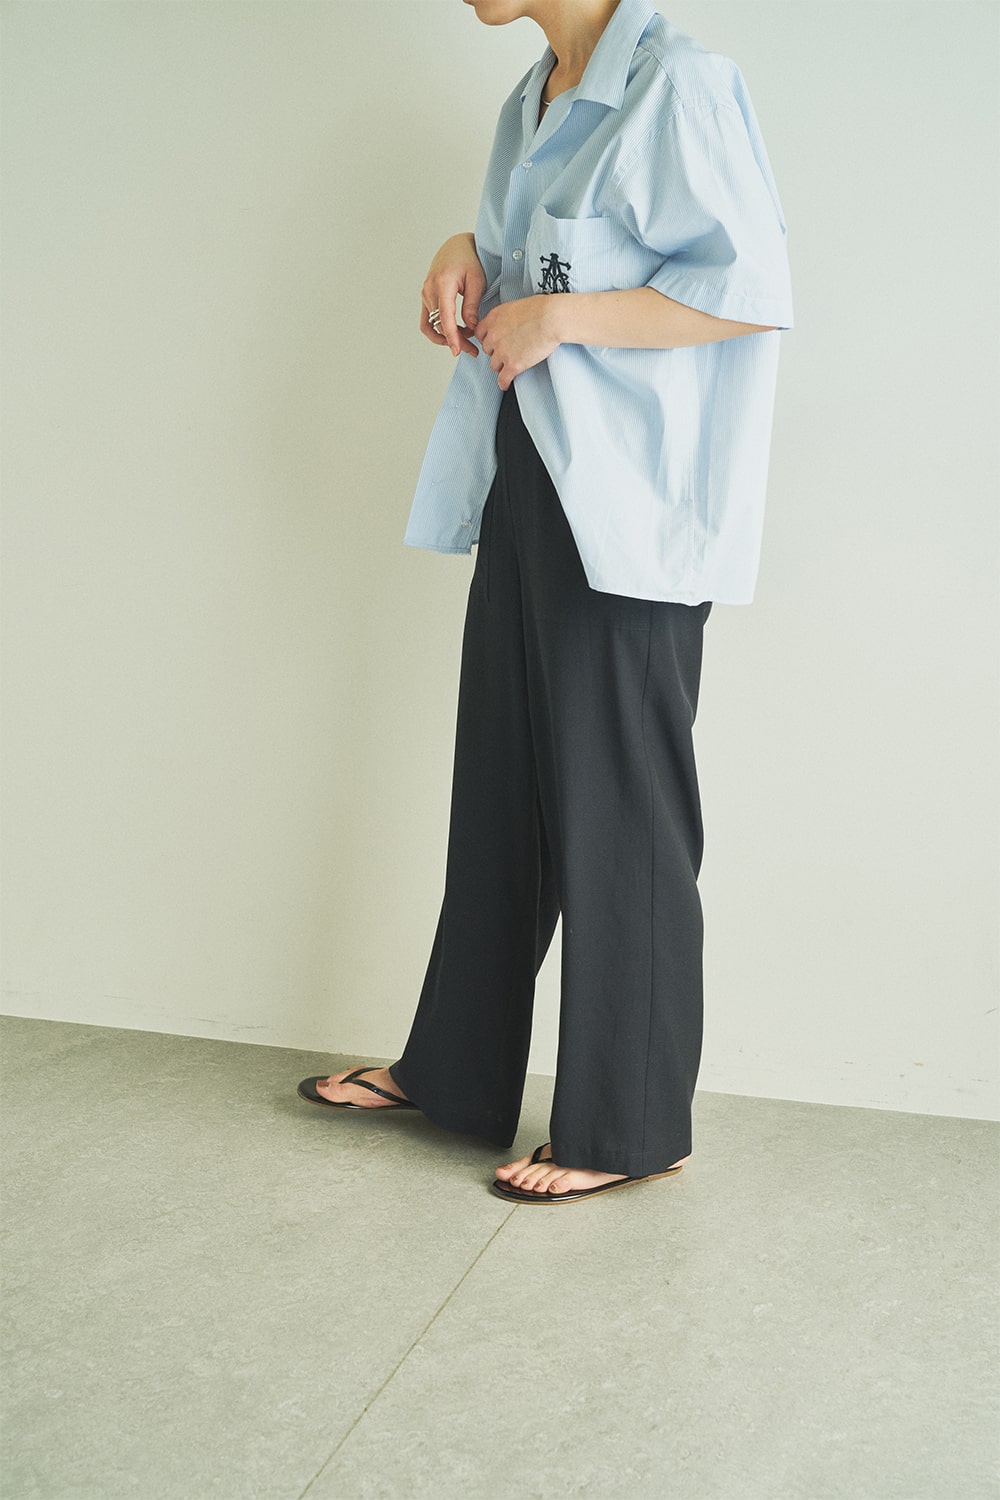 【WhimGazette】2021 Early Summer WEB LIITED ITEMS